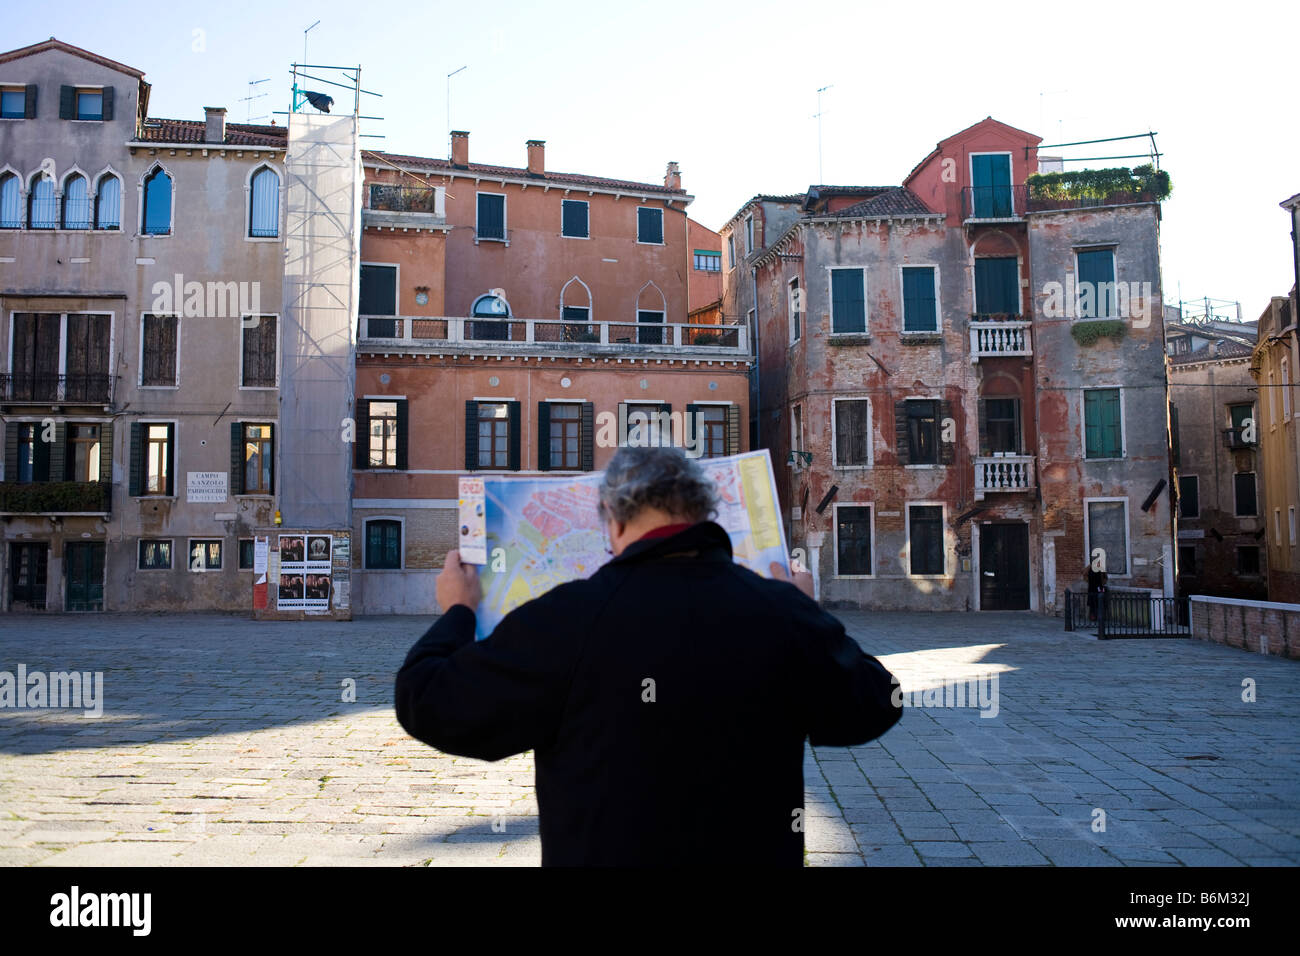 Venice, Italy. tourist looking at map in square Stock Photo